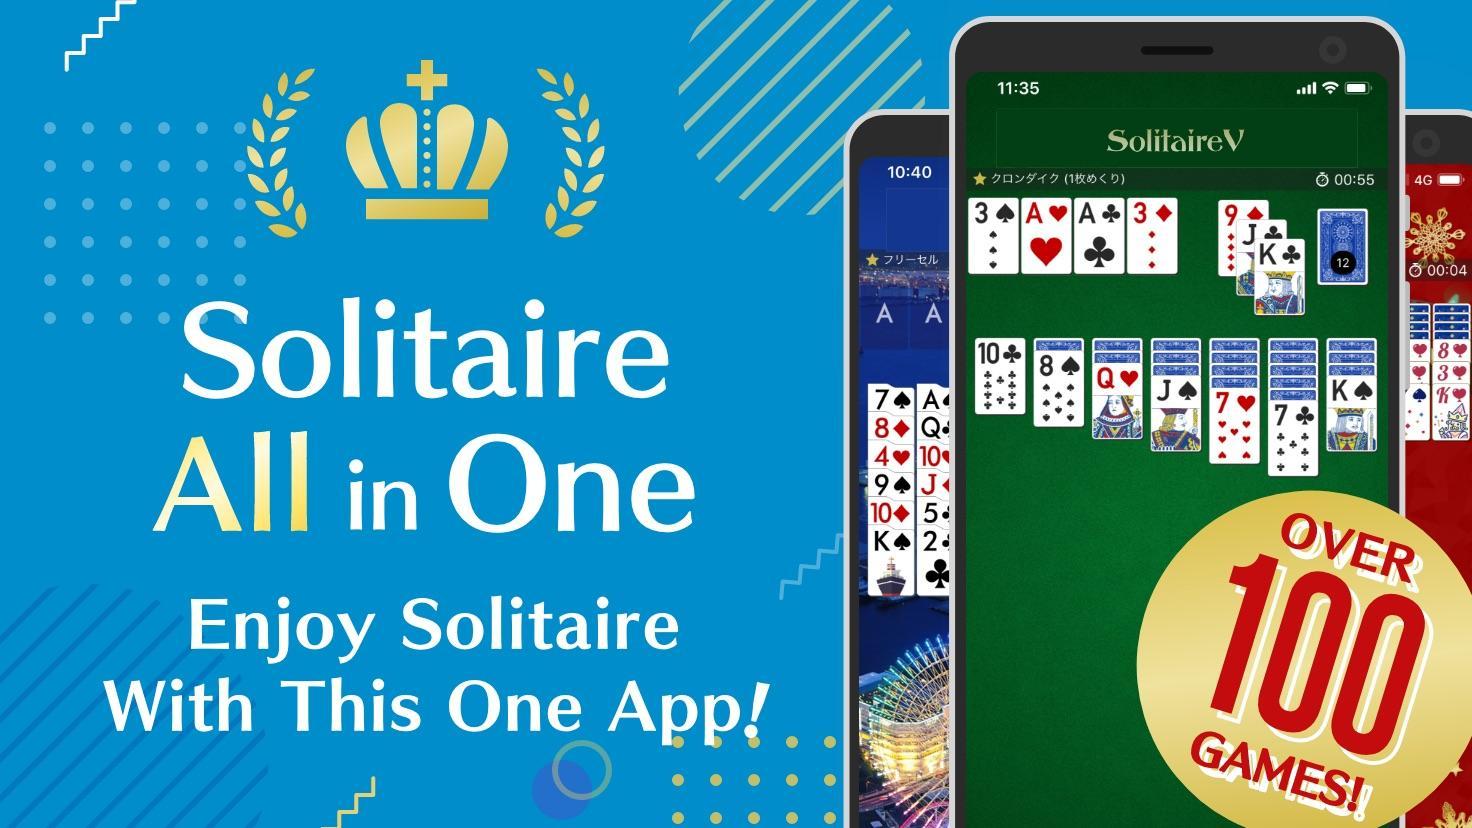 Solitaire Victory - 2020 Solitaire Collection 100 8.3.2 Screenshot 15